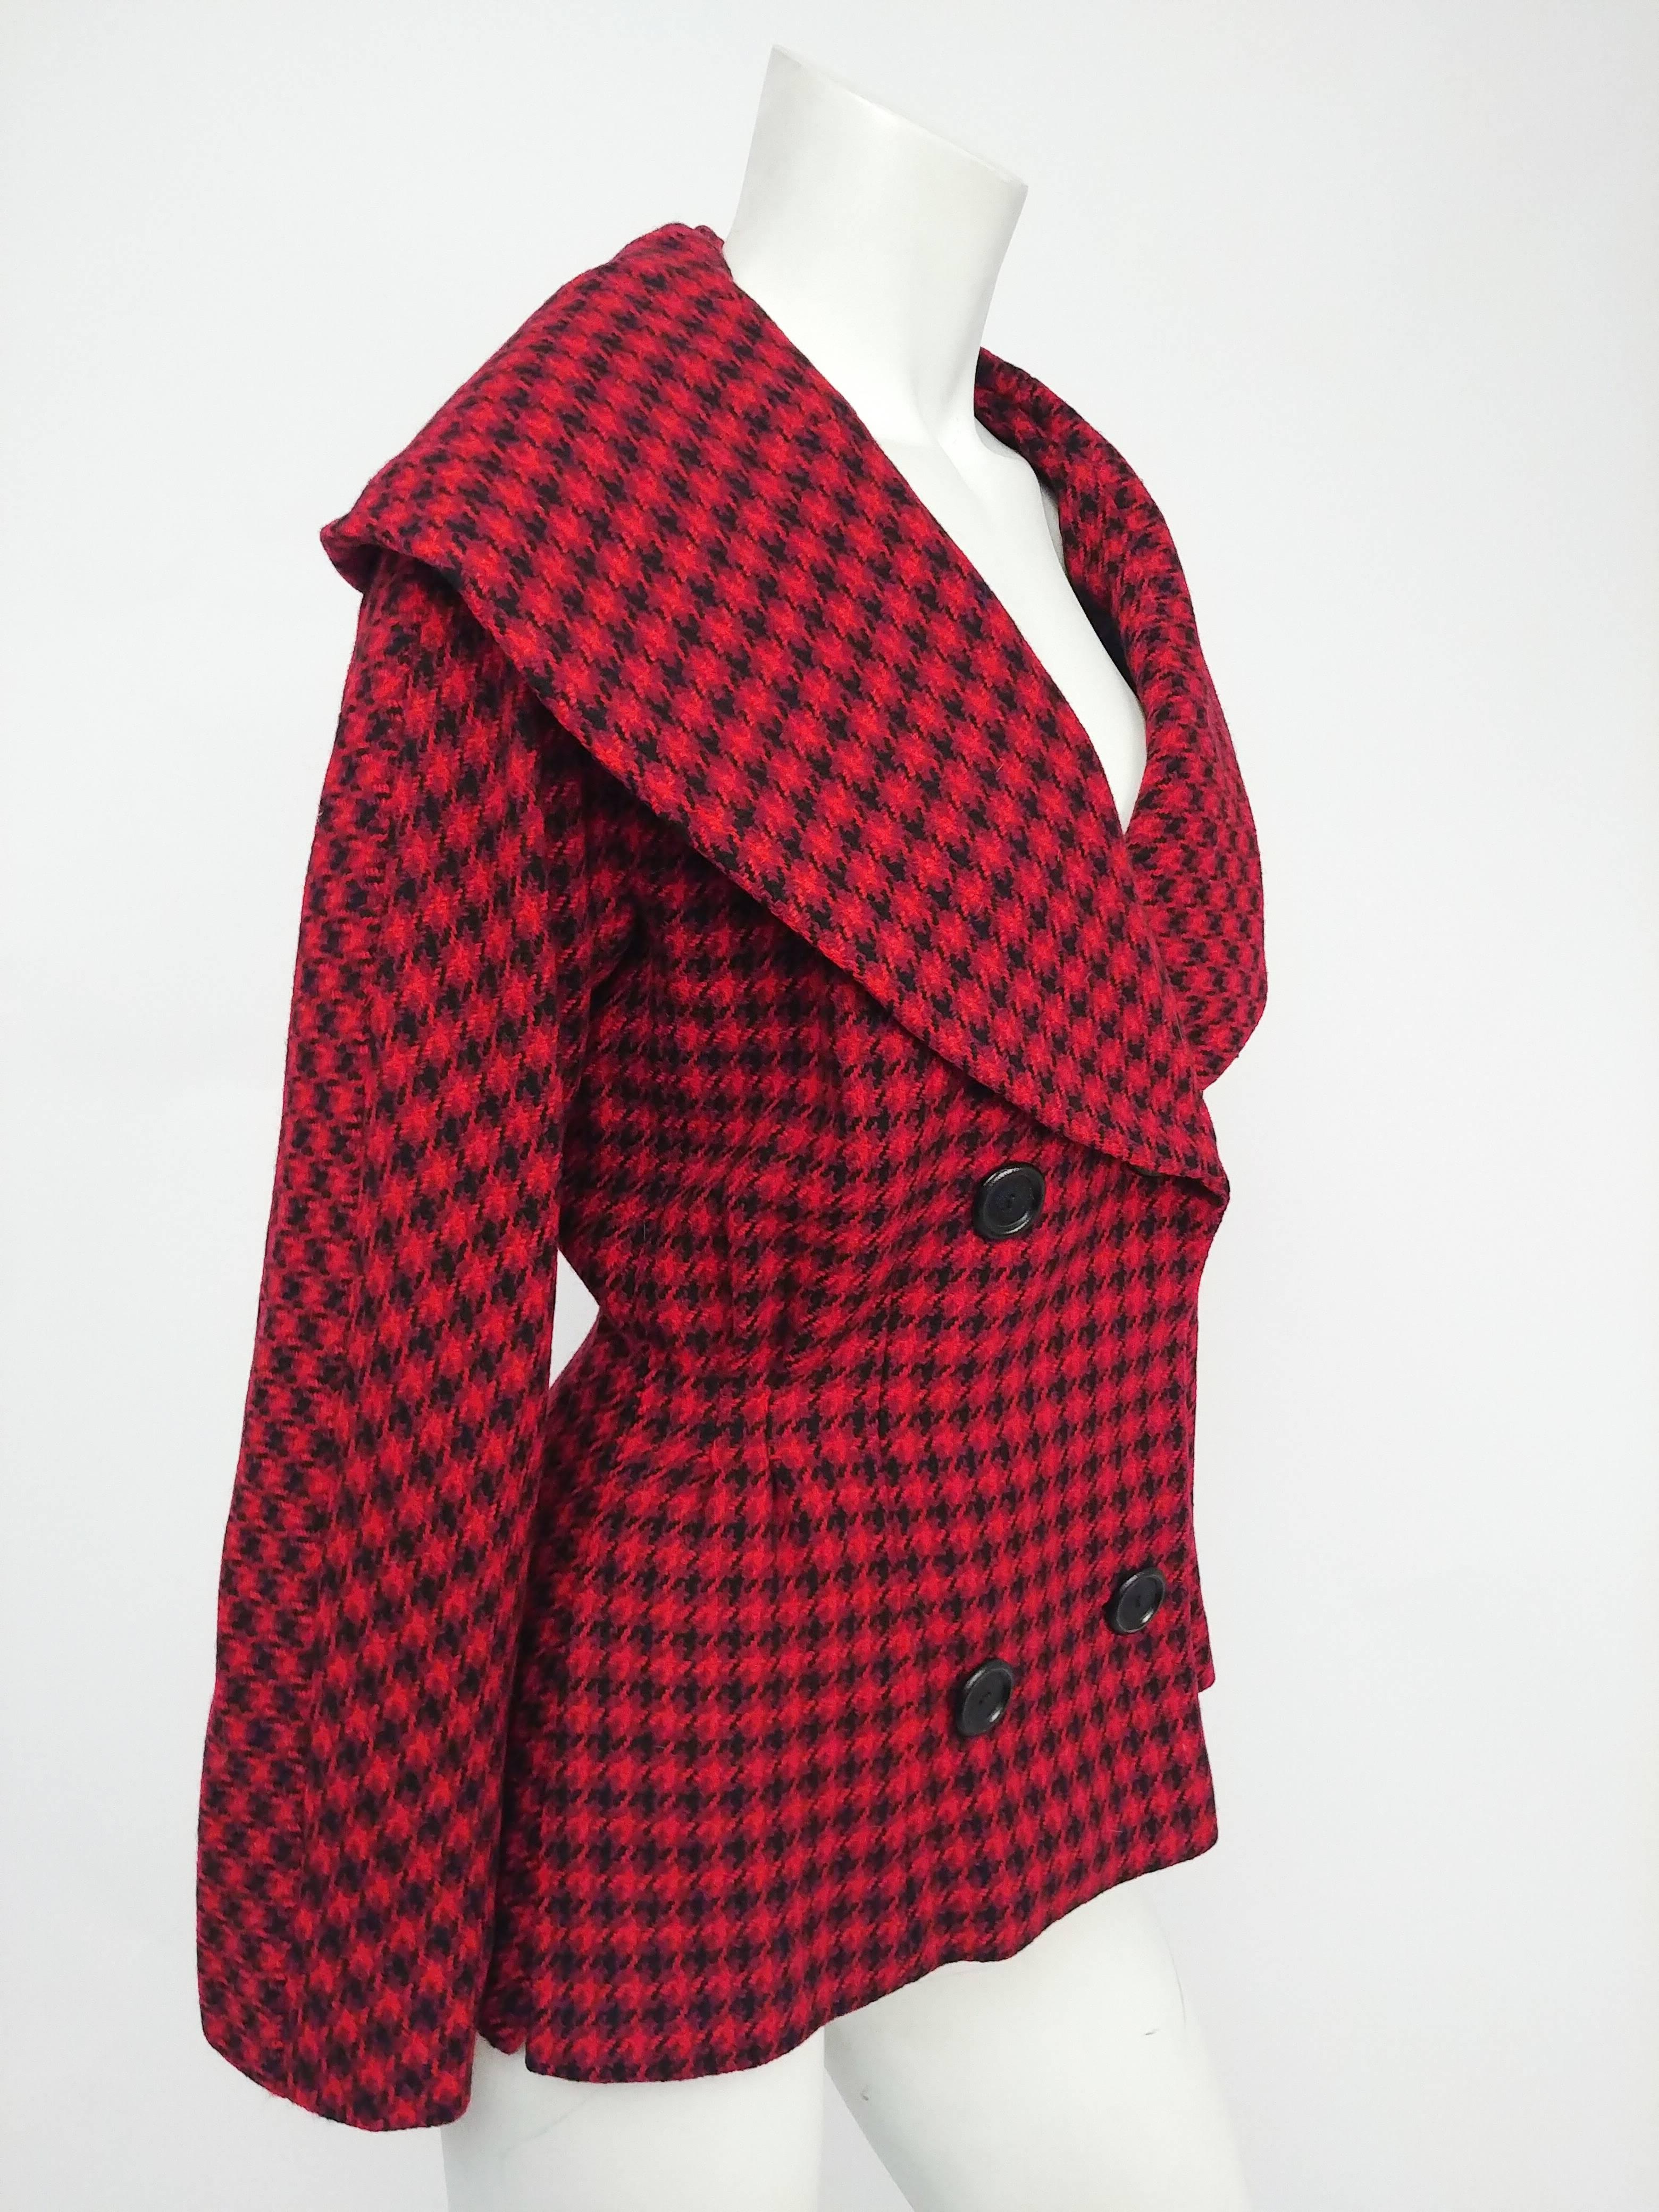 1950s Dan Millstein Red & Black Houndstooth Jacket . Portrait collar frames neck and face, double breasted. Nipped in at waist and interfaced more heavily at hips to create lovely 1950s hourglass silhouette. 